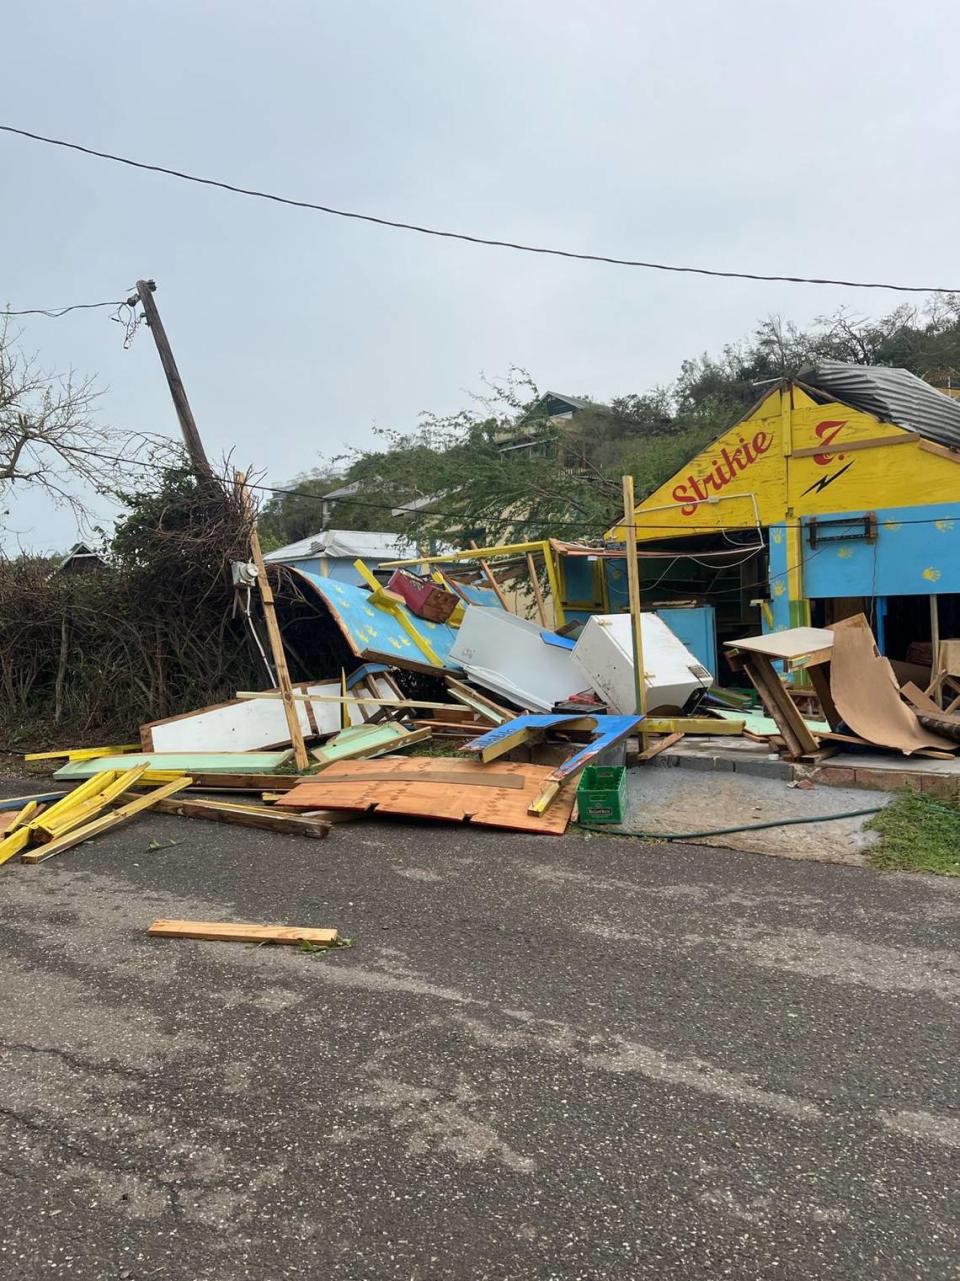 In Treasure Beach, a small fishing and agricultural community on the coast of southern Jamaica, residents said that there was widespread property damage.